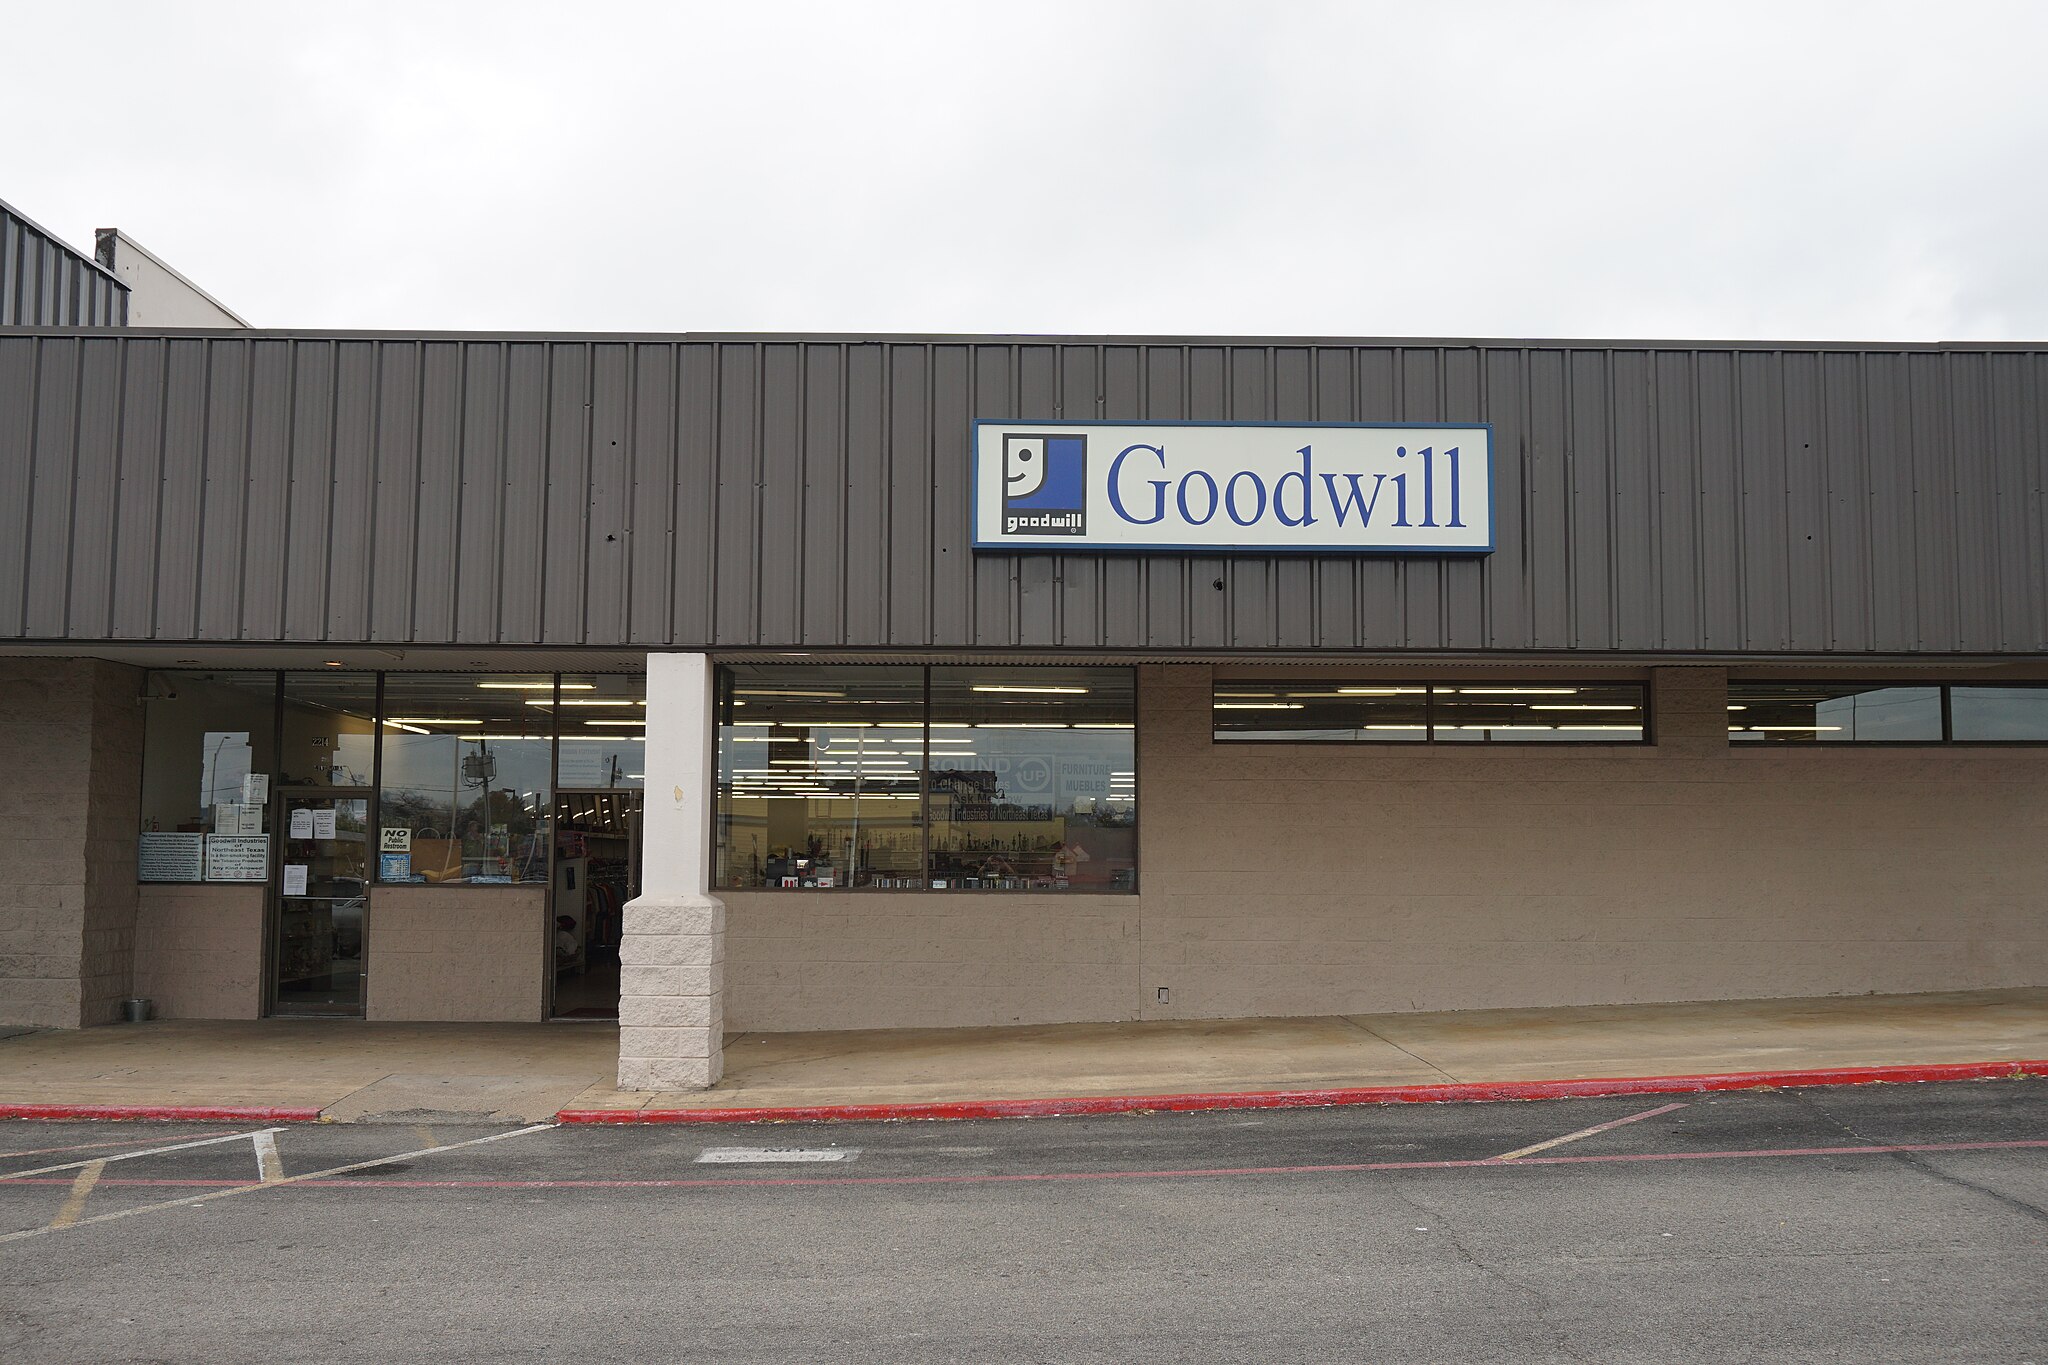 Pike County Detention Center Teams Up with Goodwill to Tackle Recidivism - Inmate Lookup